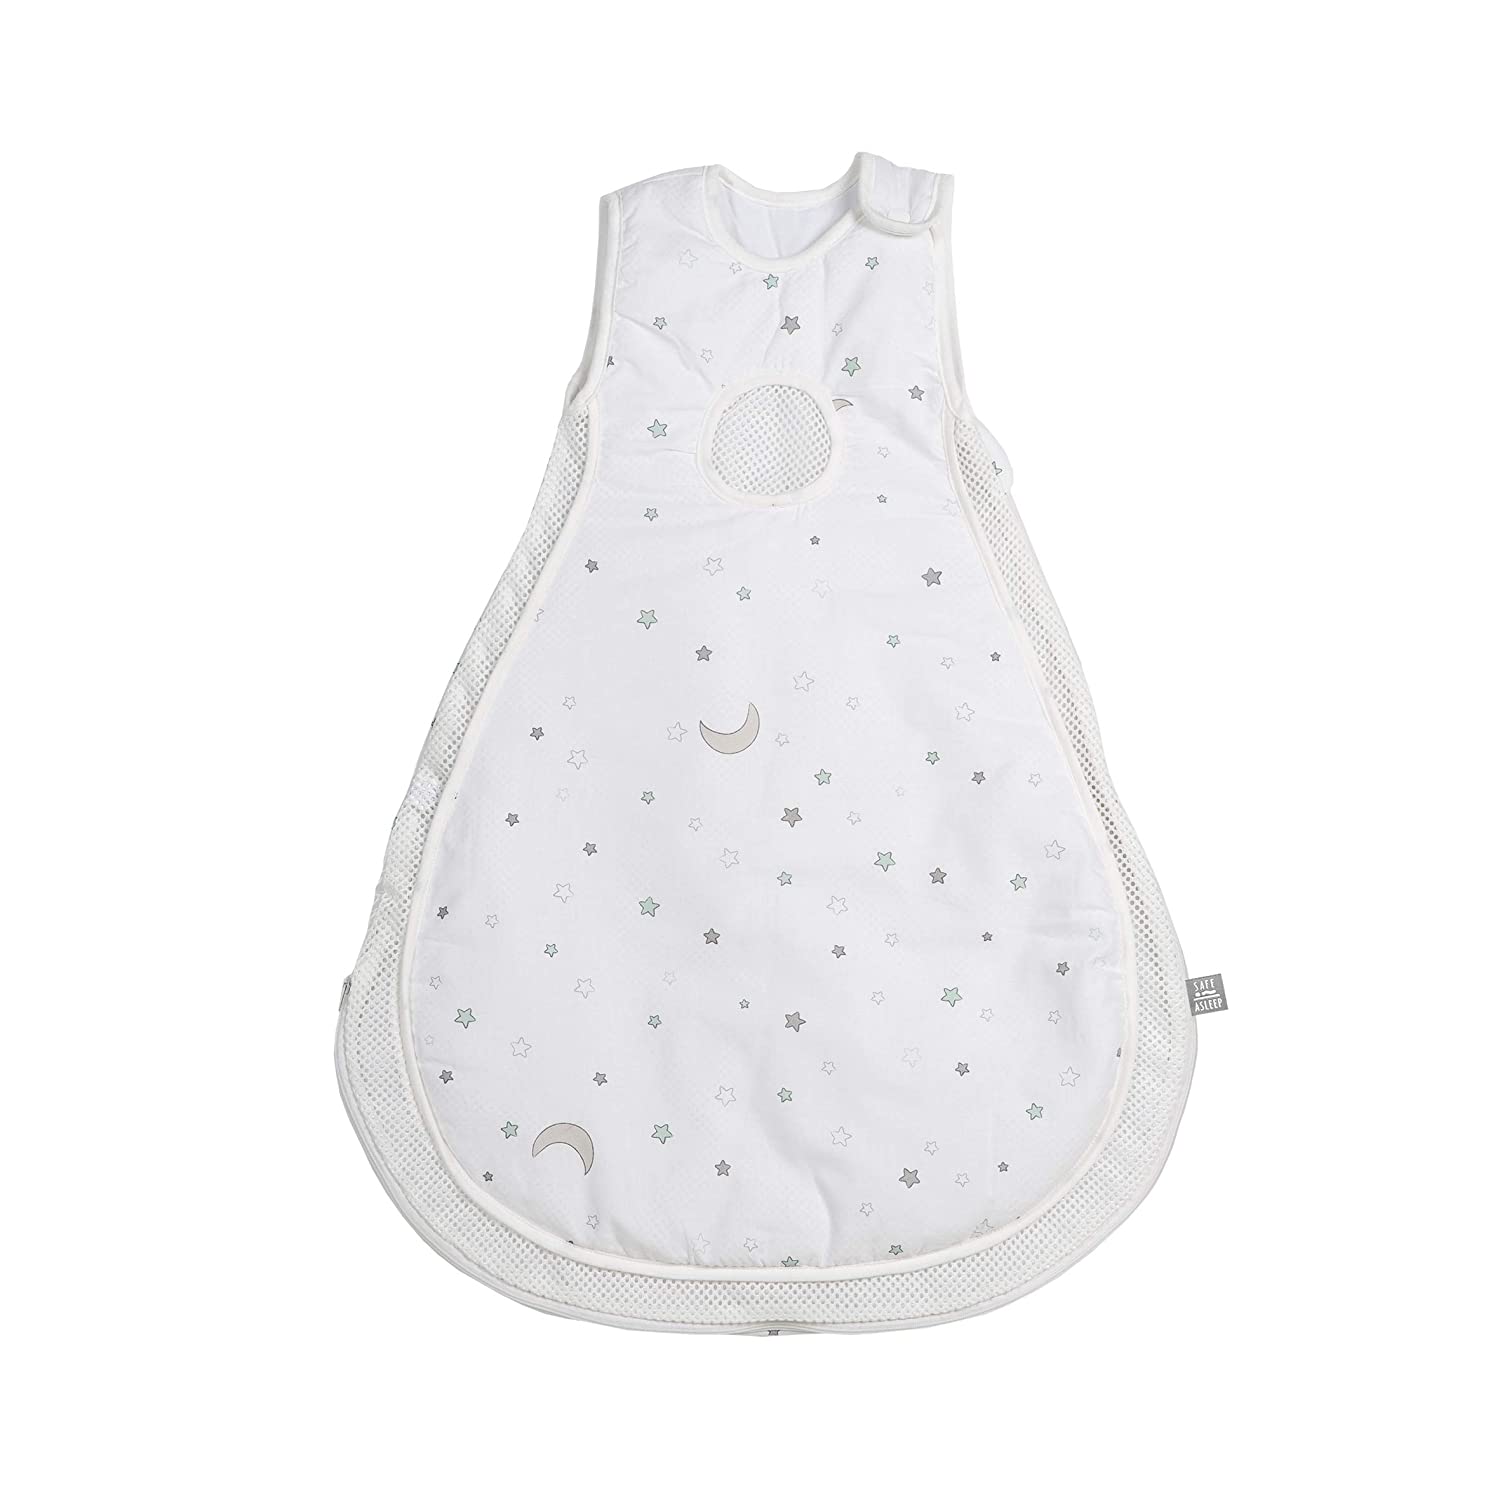 Safe Sleep by Roba Easy Air Baby Sleeping Bag \"Star Magic\", Size 74/80 cm, 100% Cotton, Woven, Printed, Soft Filling 100% PES, Mesh Inserts, Air Balance System